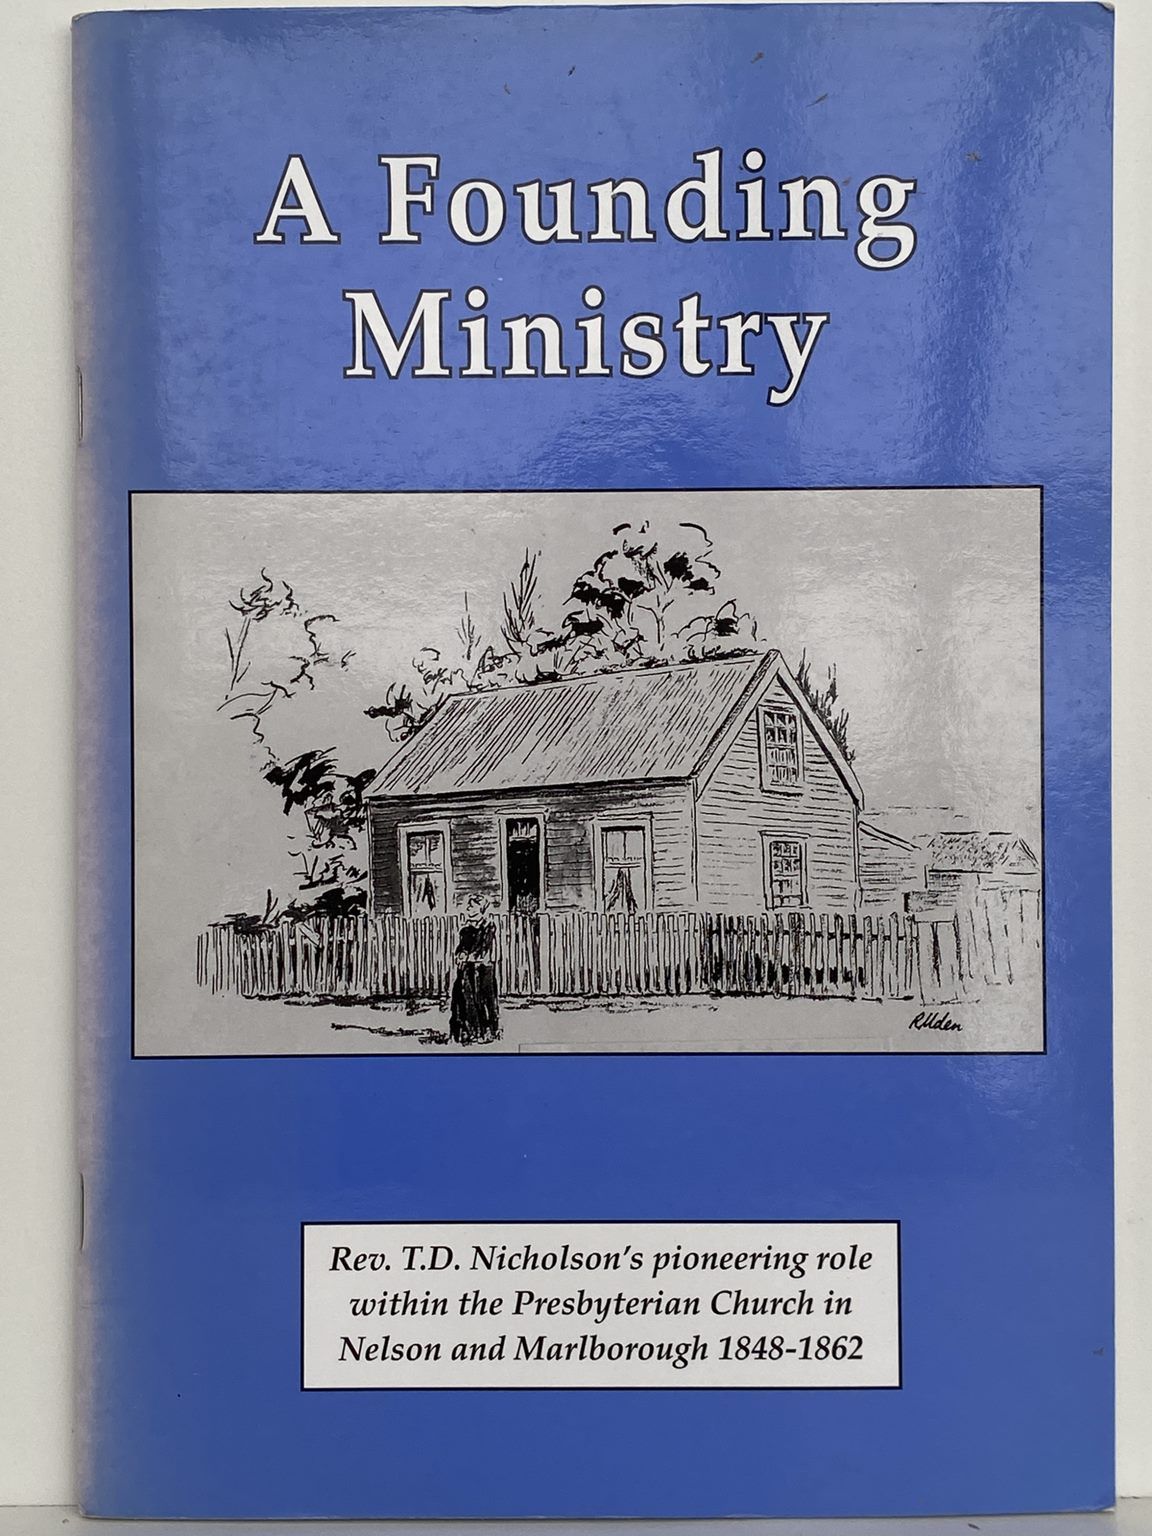 A FOUNDING MINISTRY: Presbyterian Church in Nelson and Marlborough